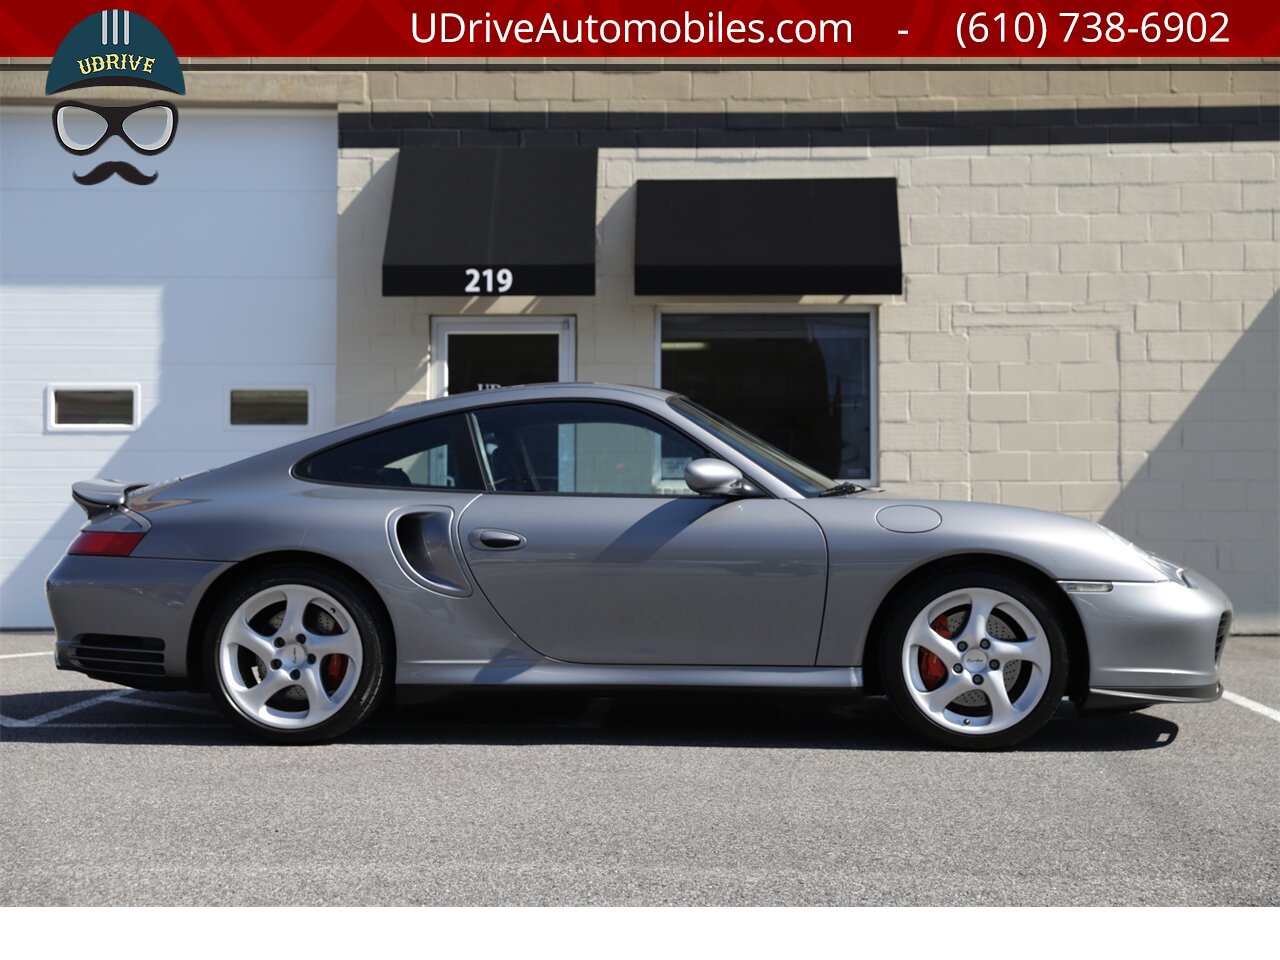 2003 Porsche 911 996 Turbo X50 Power Kit 6 Speed Seal Grey  over Black Leather - Photo 17 - West Chester, PA 19382